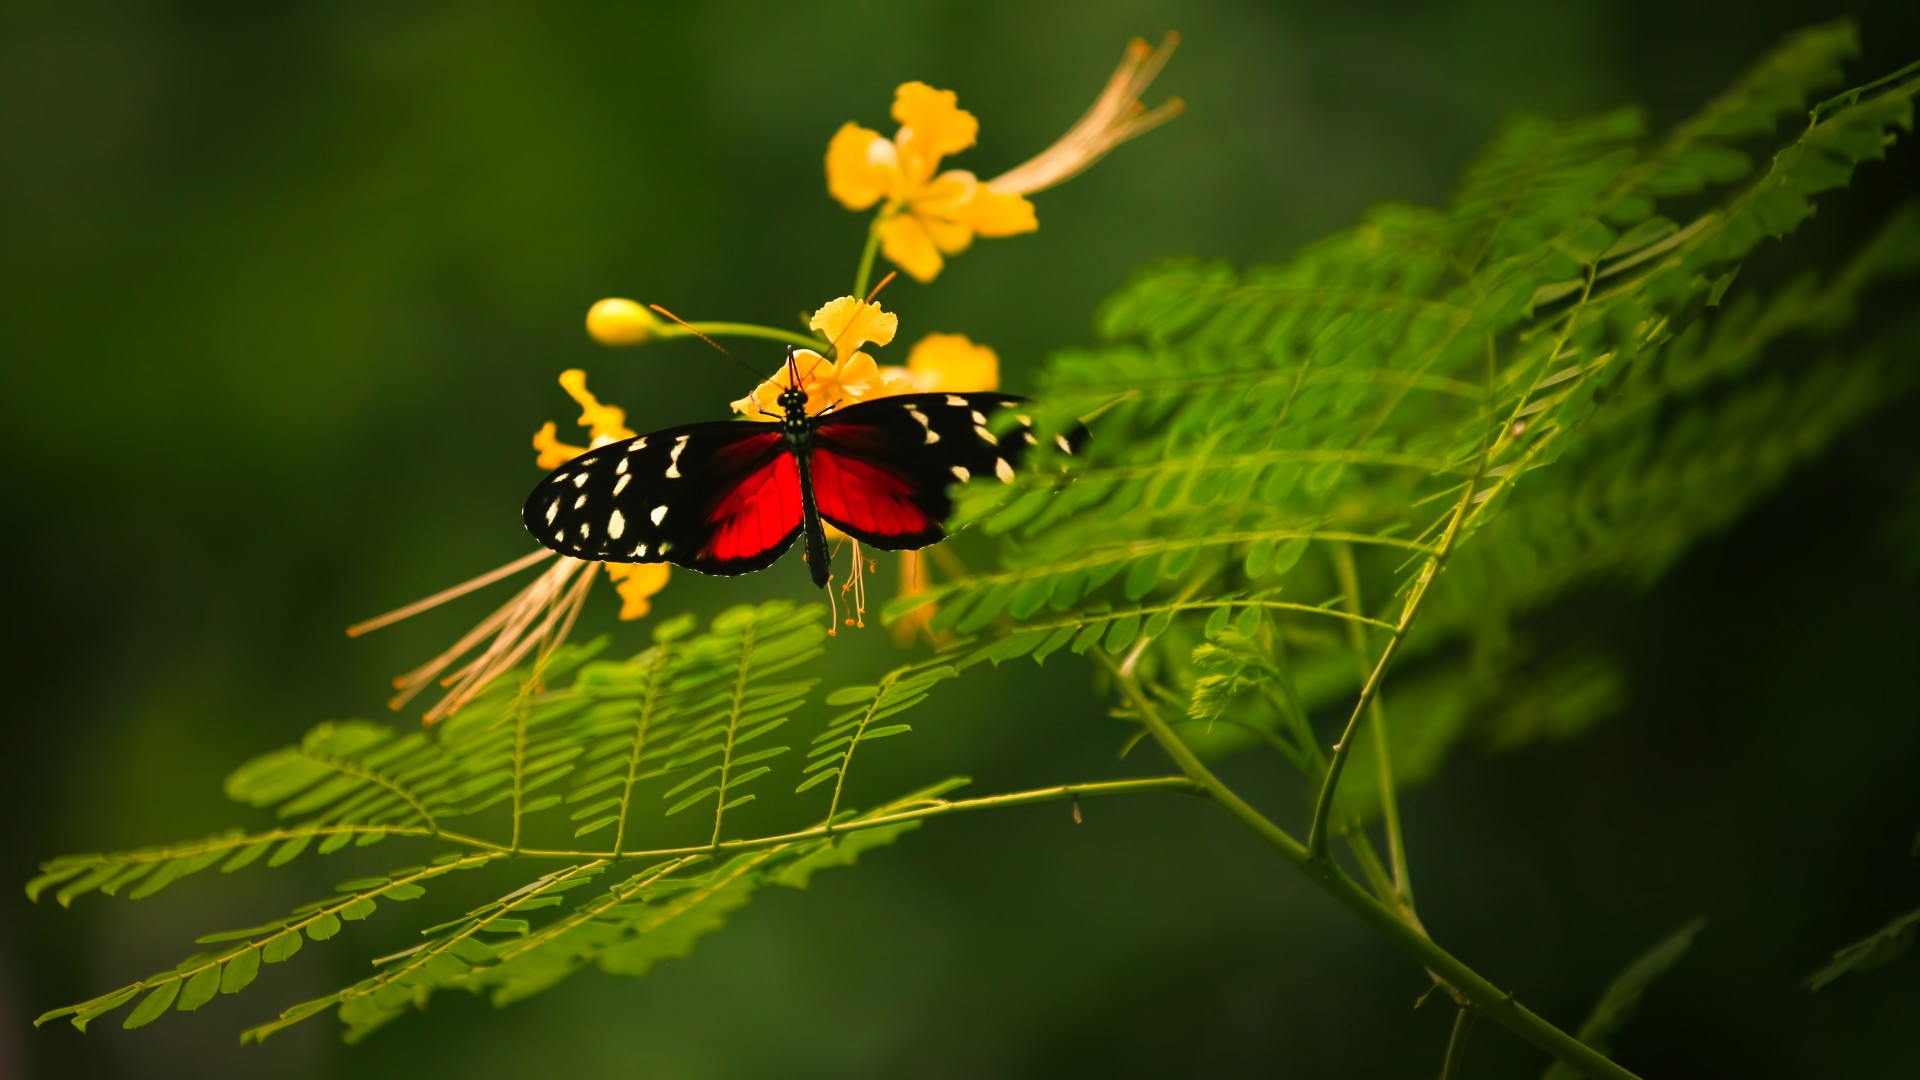 Beautiful Butterfly, red wings, green background, wild nature, yellow flowers, insects (horizontal)